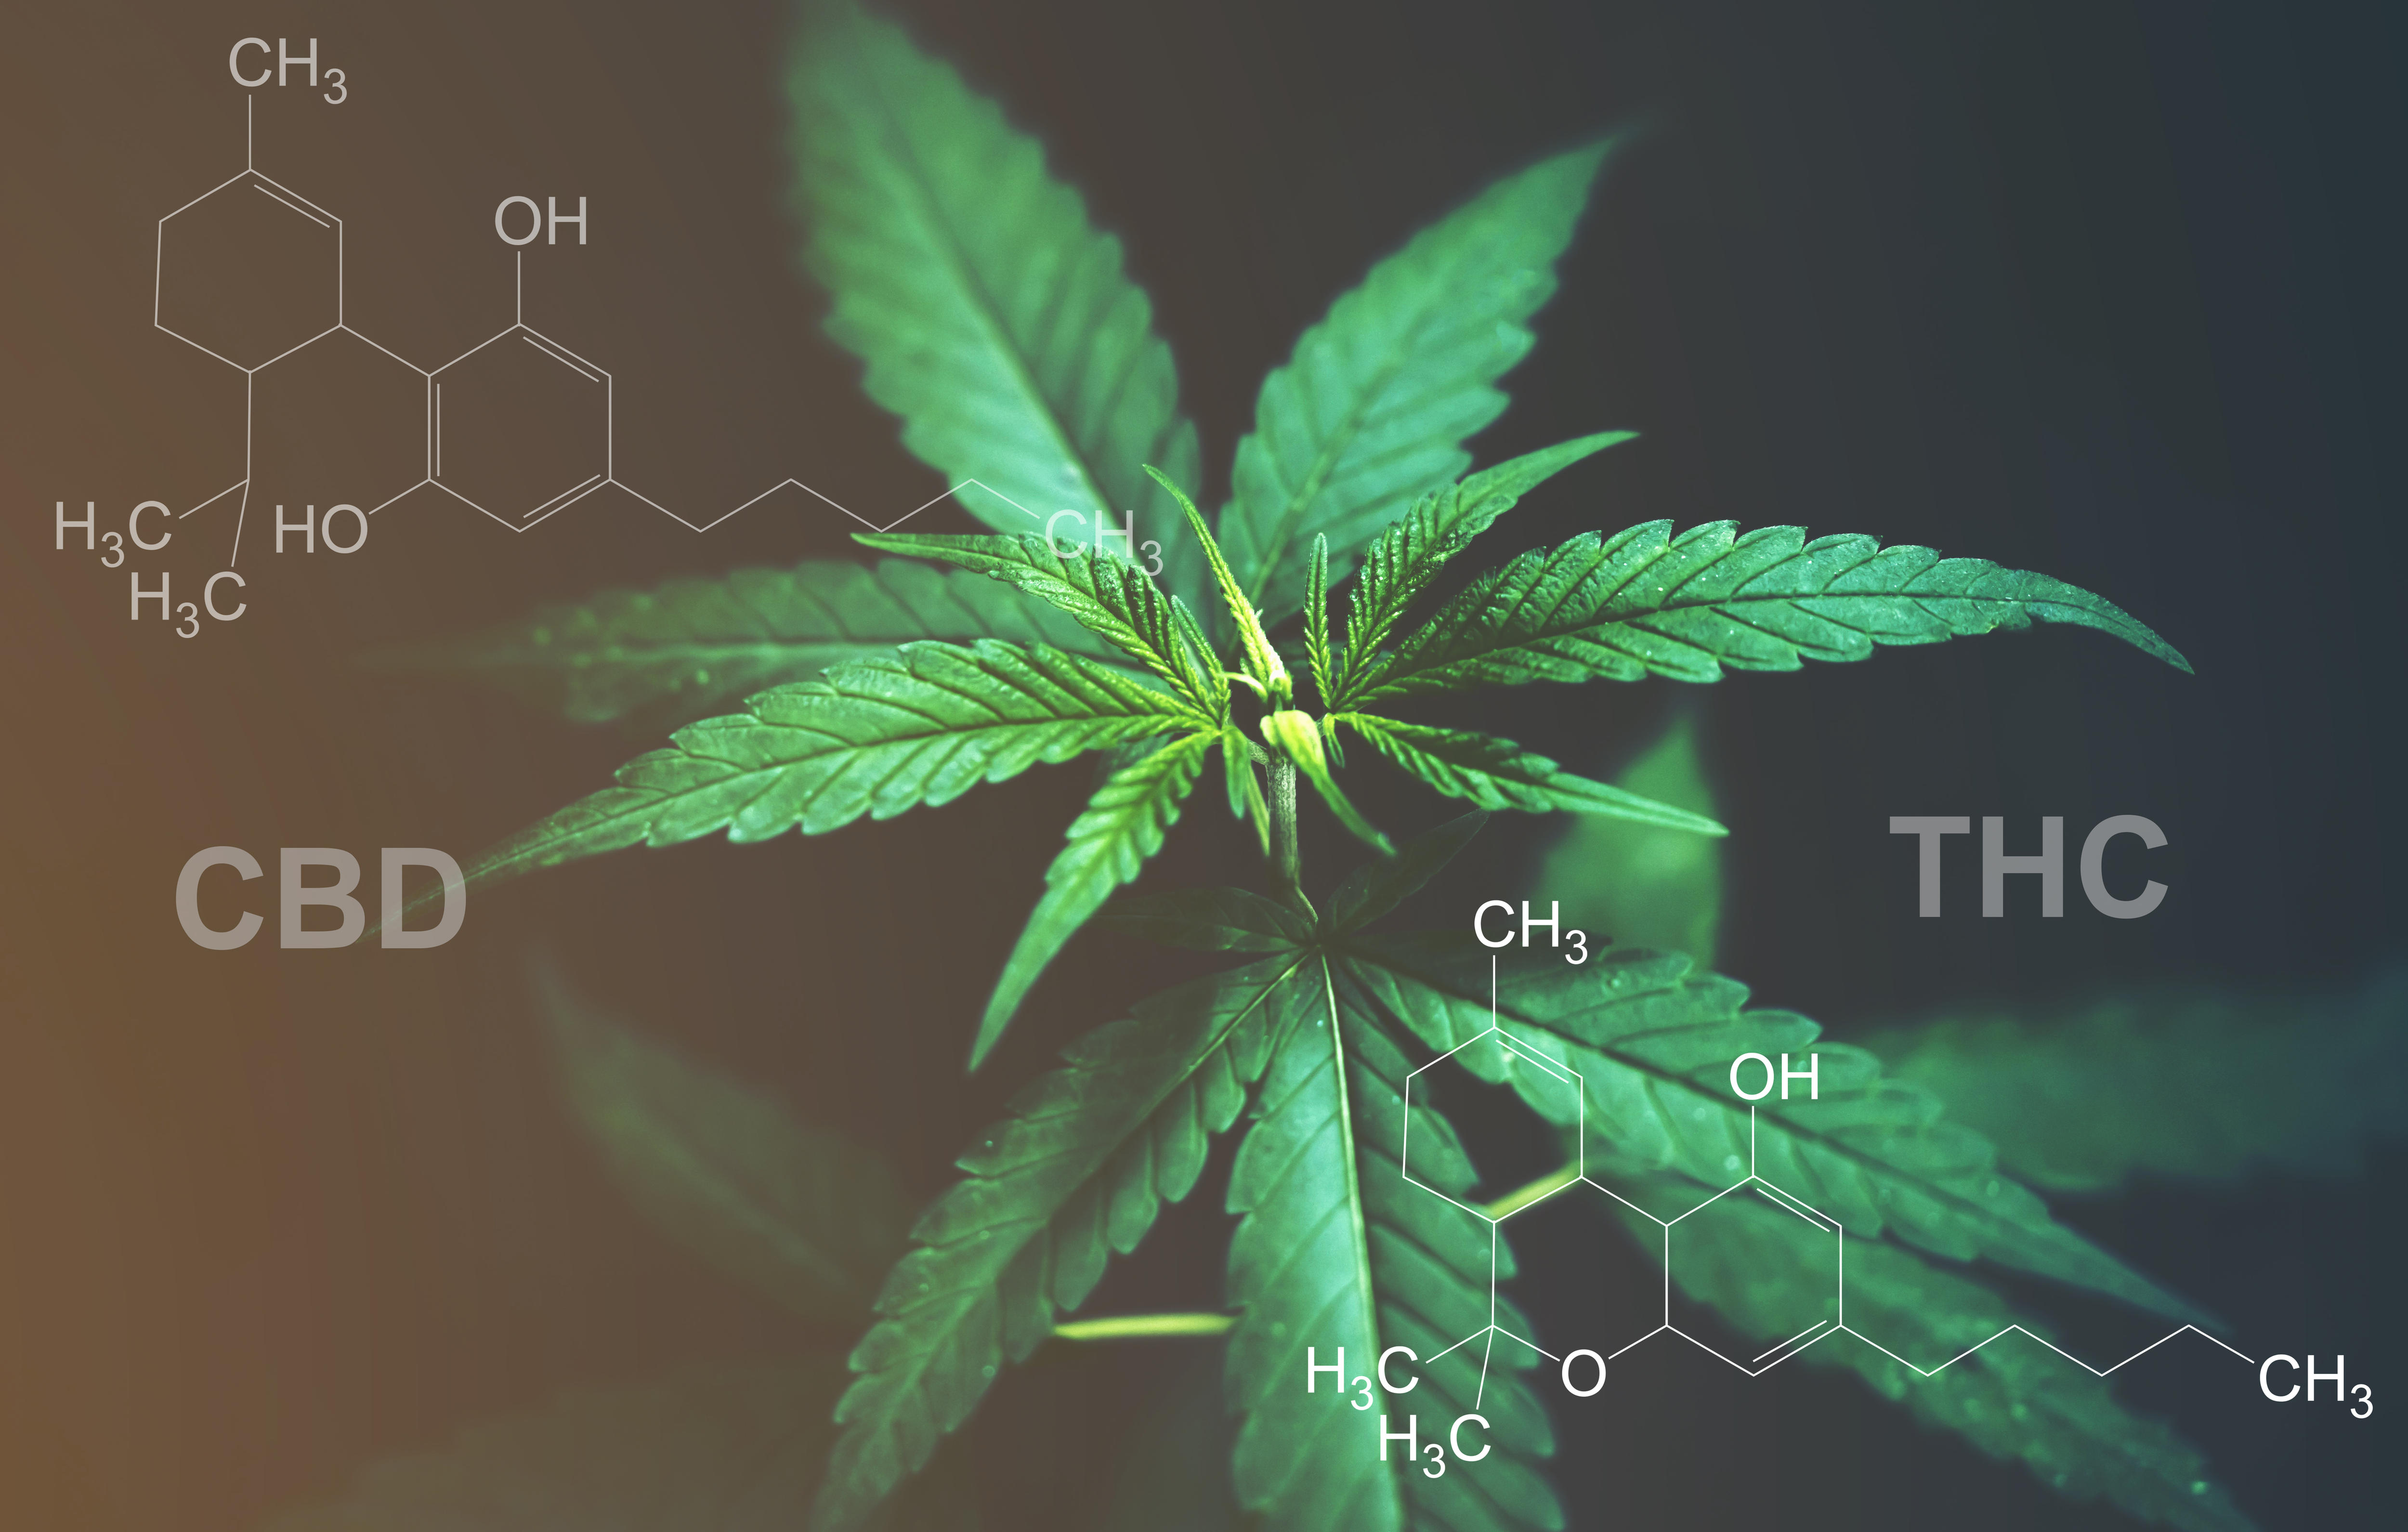 Image of marijuana plant with CBD and THC chemical structures superimposed